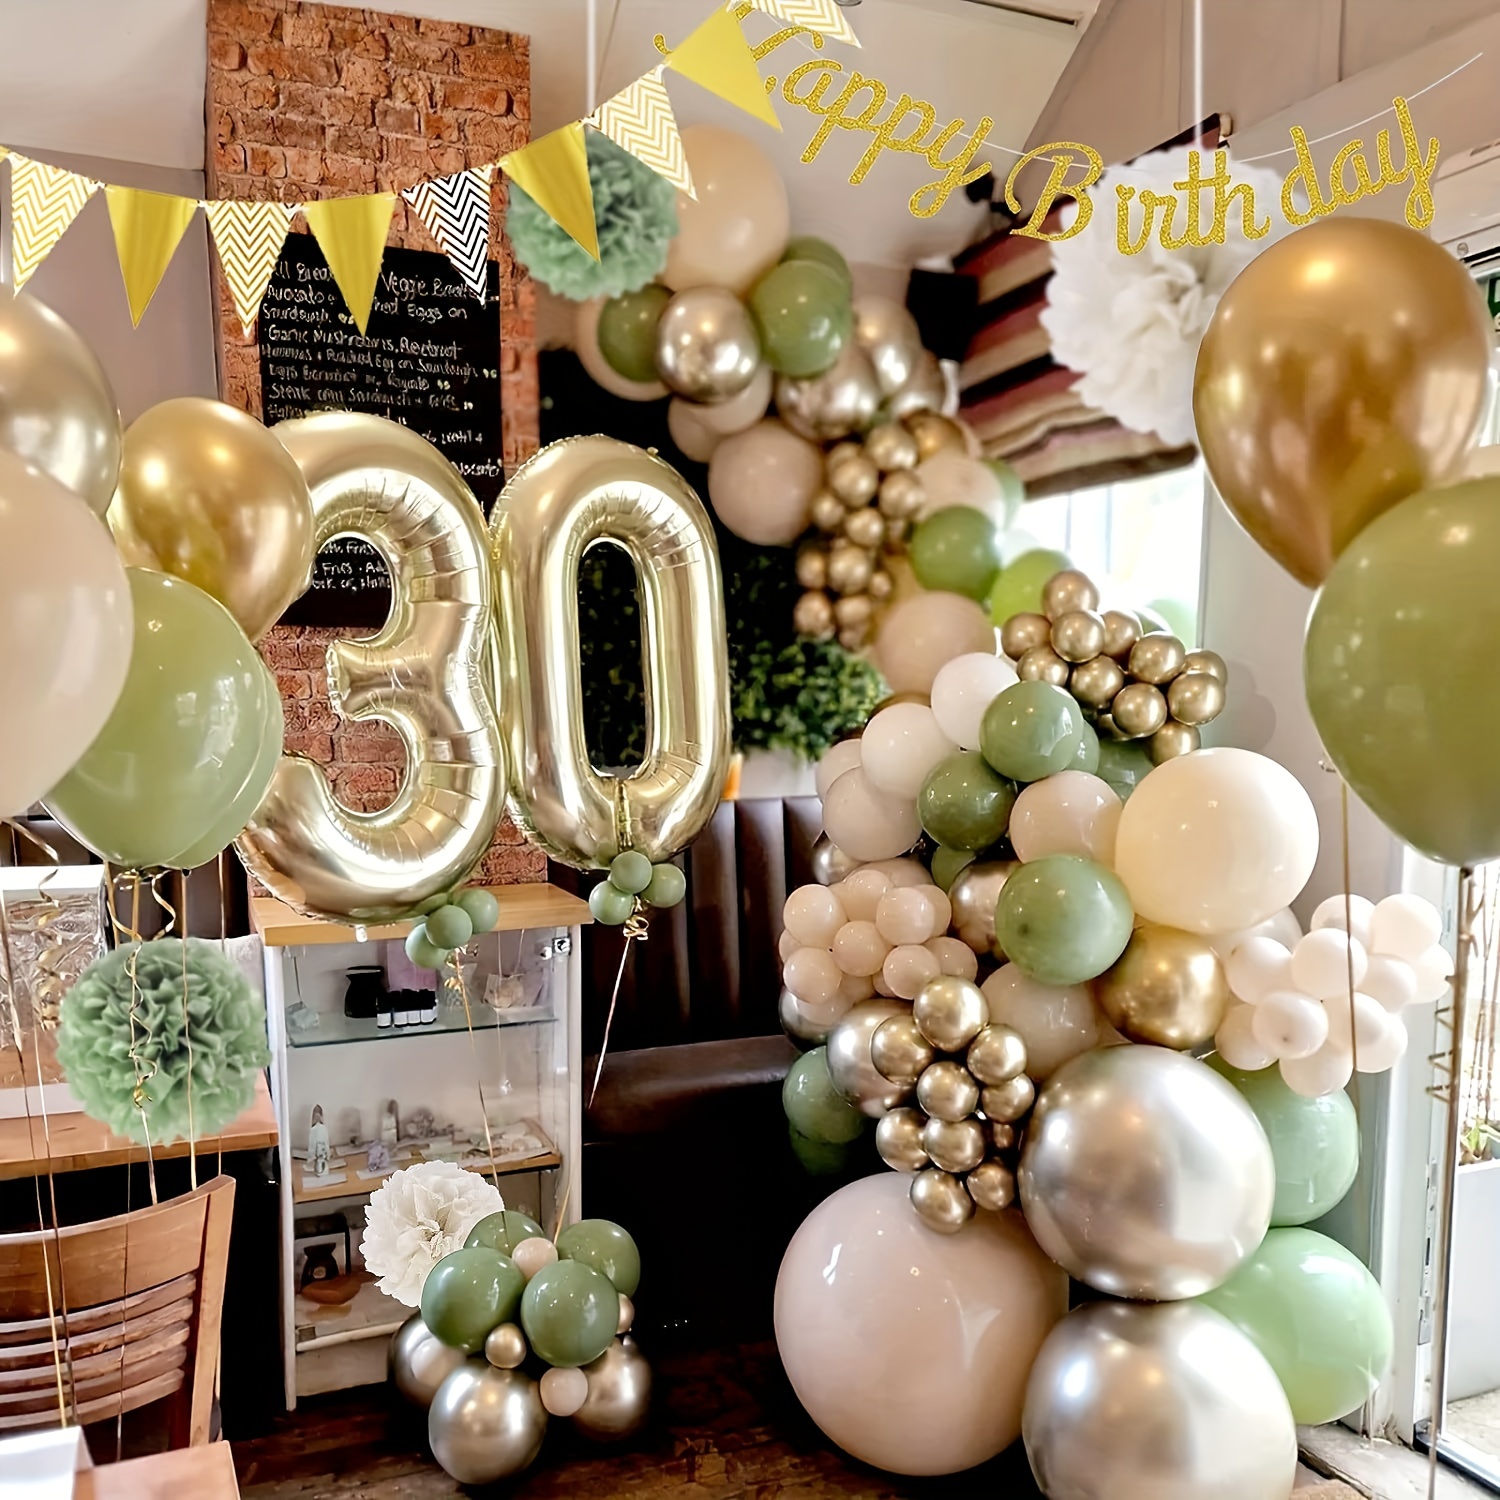 Green and Gold Birthday Party Decorations for Men Women Girls 145pcs  Birthday Party Supplies Green Garland Kit Gold Happy Birthday Banner with  Green